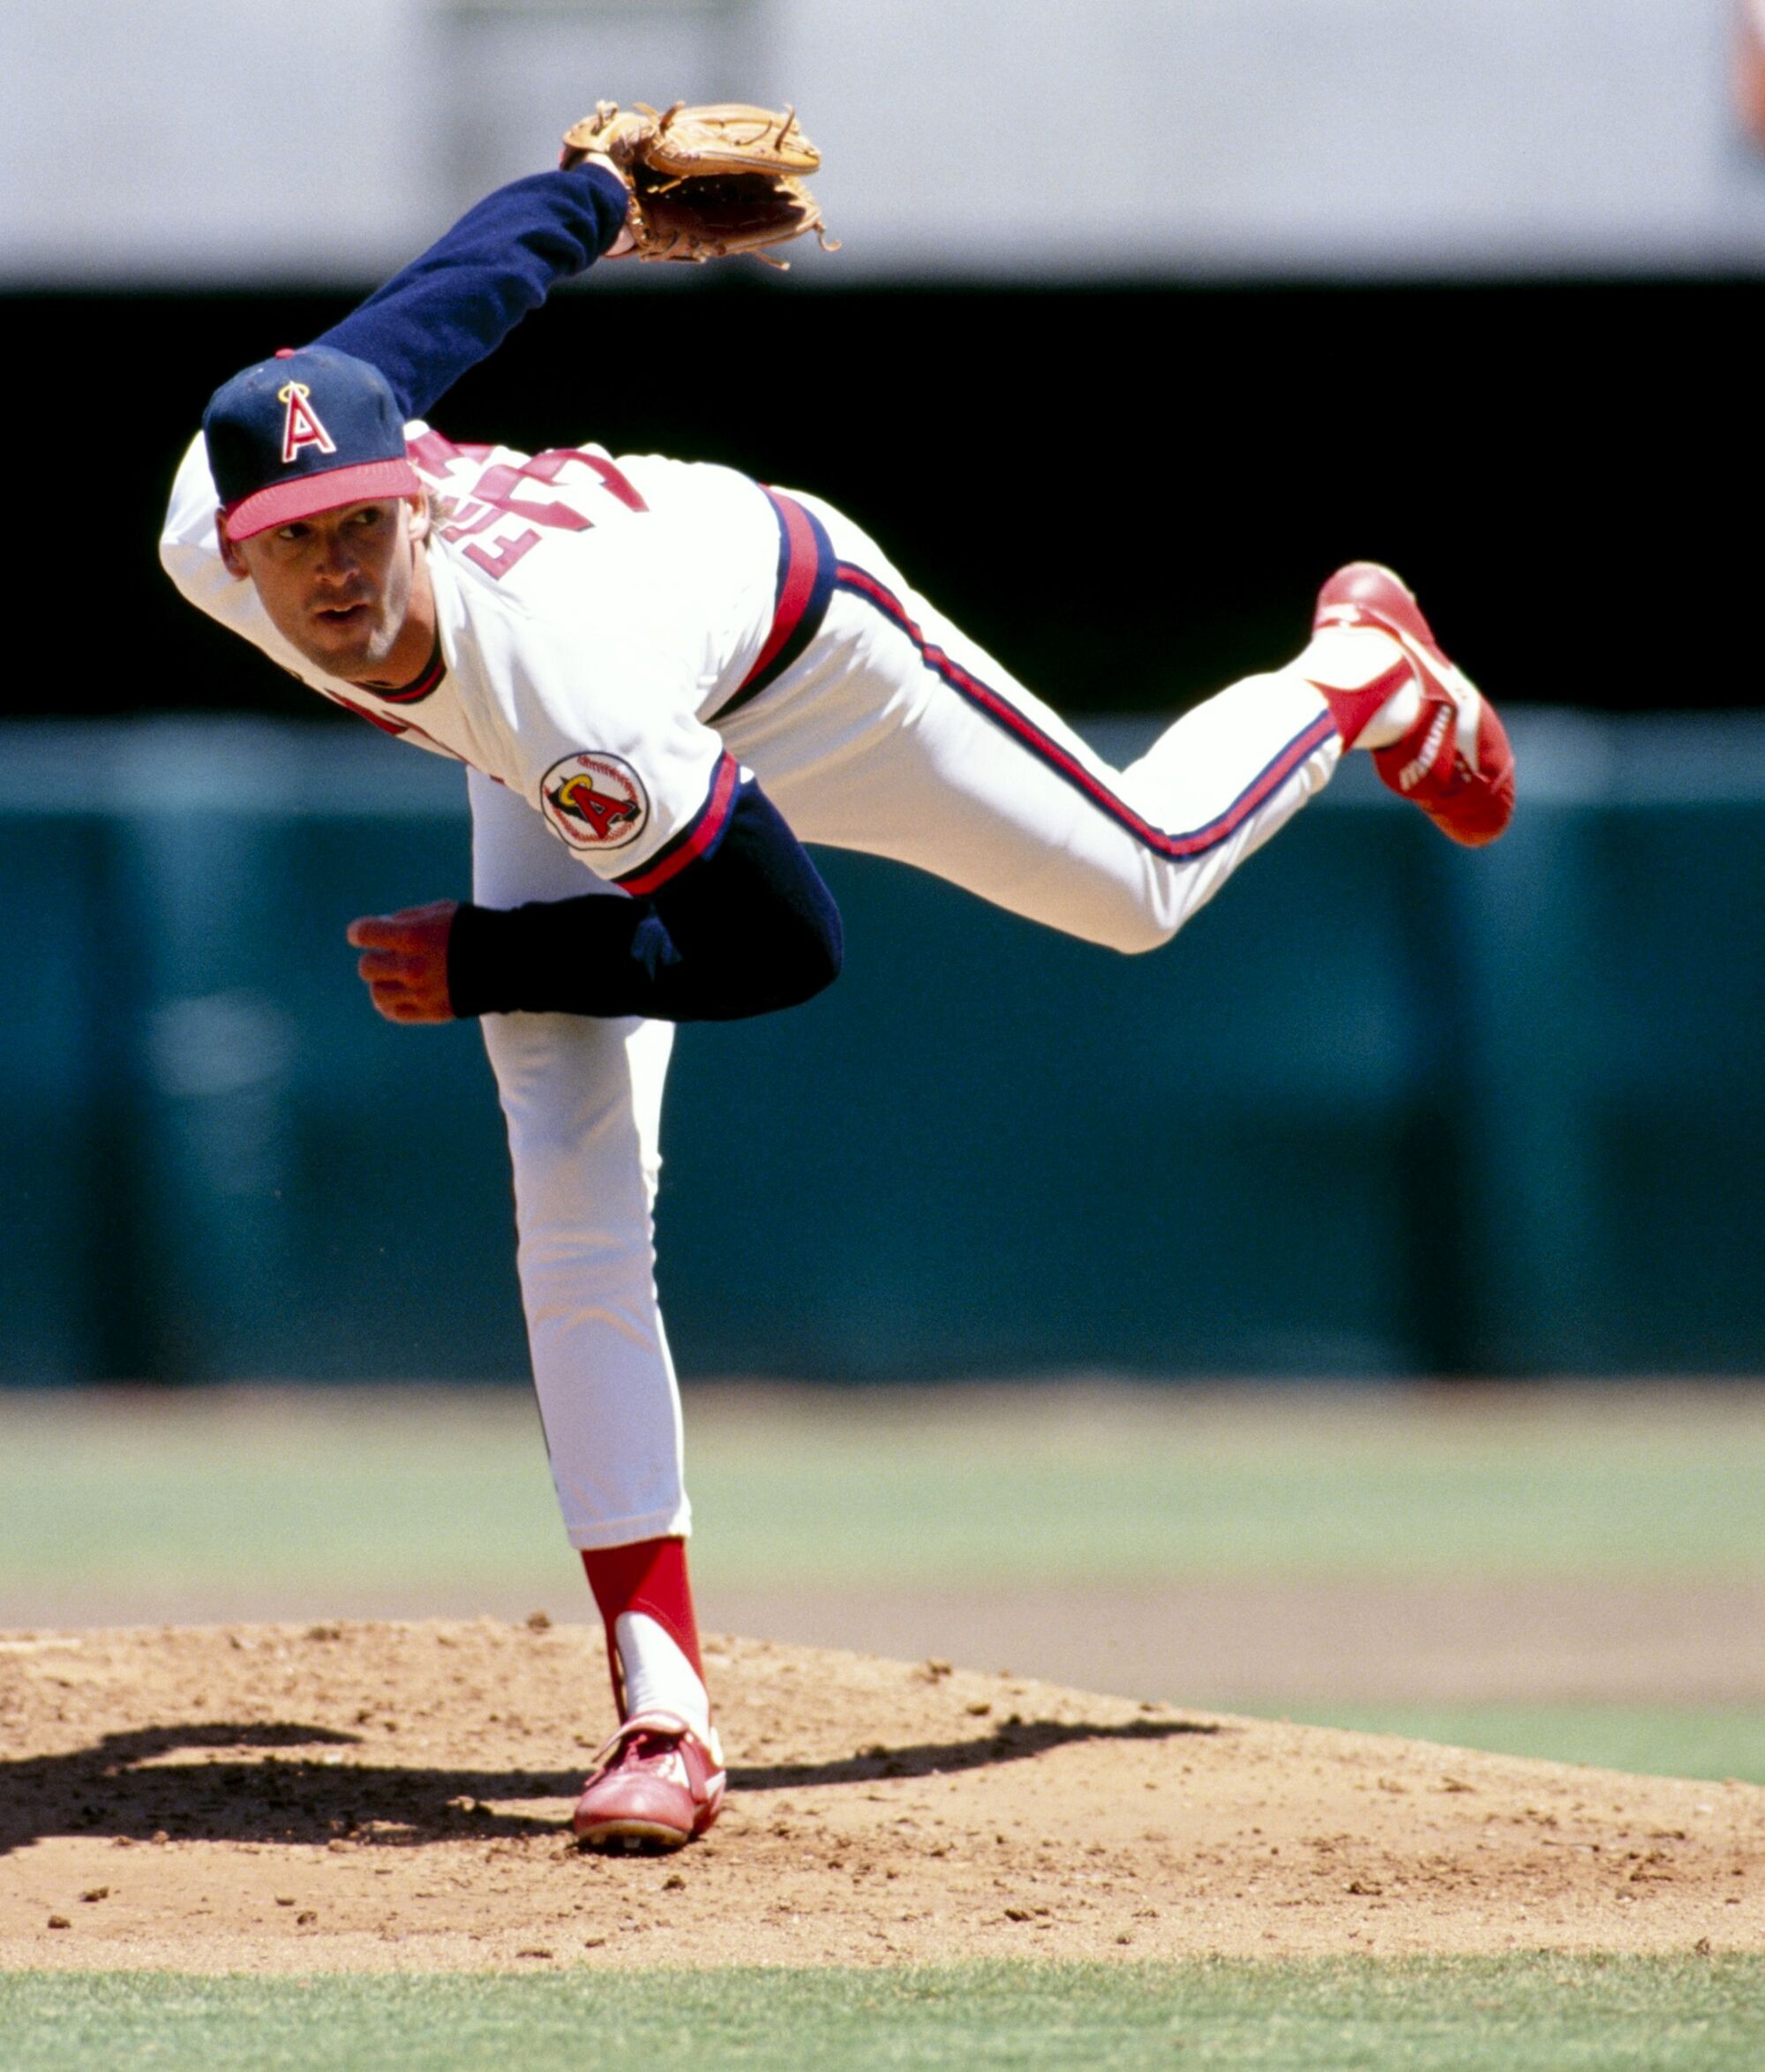  Chuck Finley pitches during a game in Anaheim/